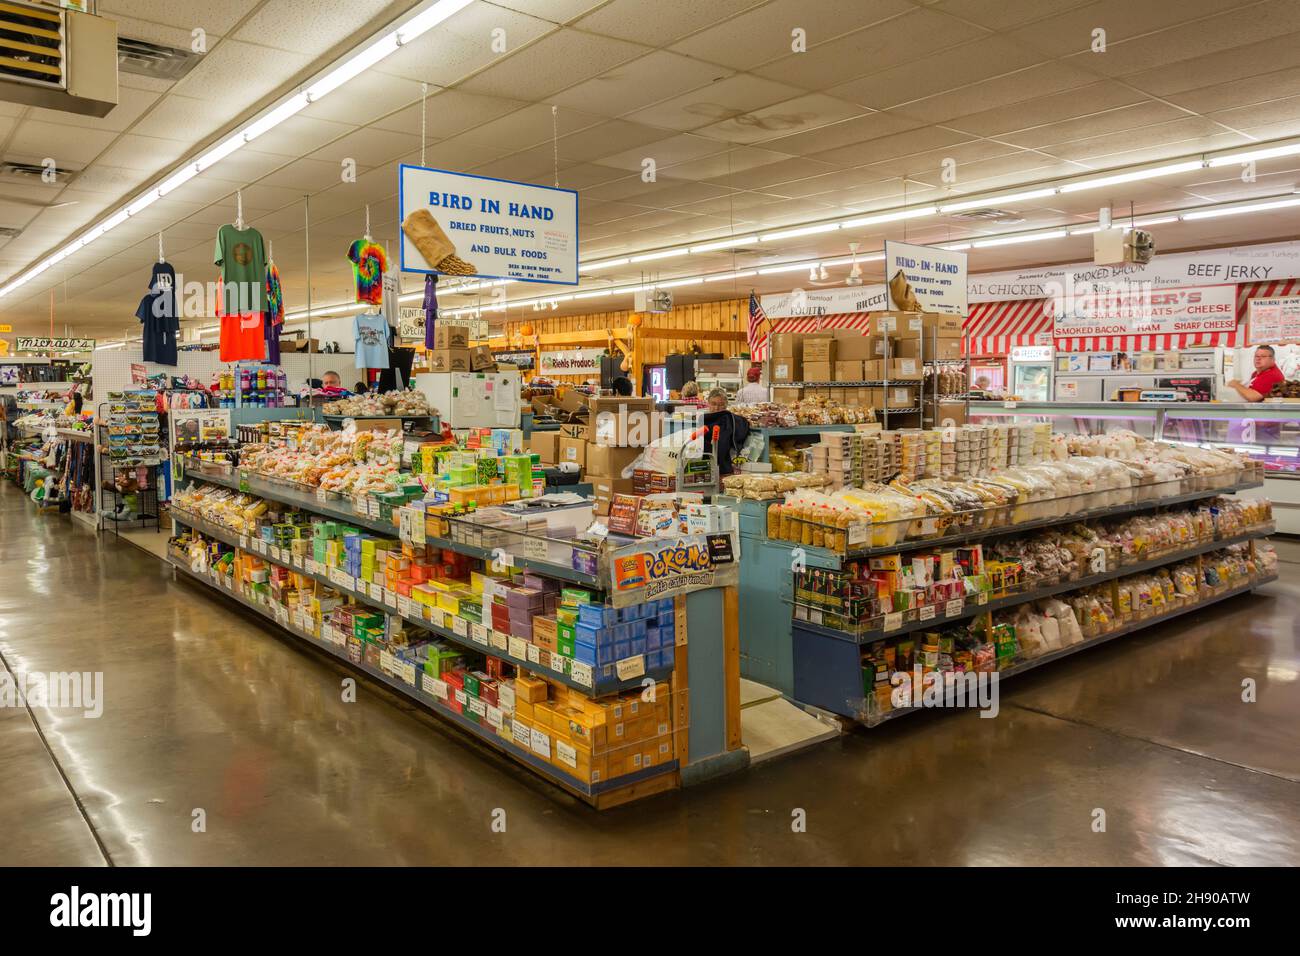 Bird-in-Hand, Pennsylvania, United States of America – September 30, 2016. Interior view of the Bird-in-Hand Farmers Market. View with shelves of food Stock Photo